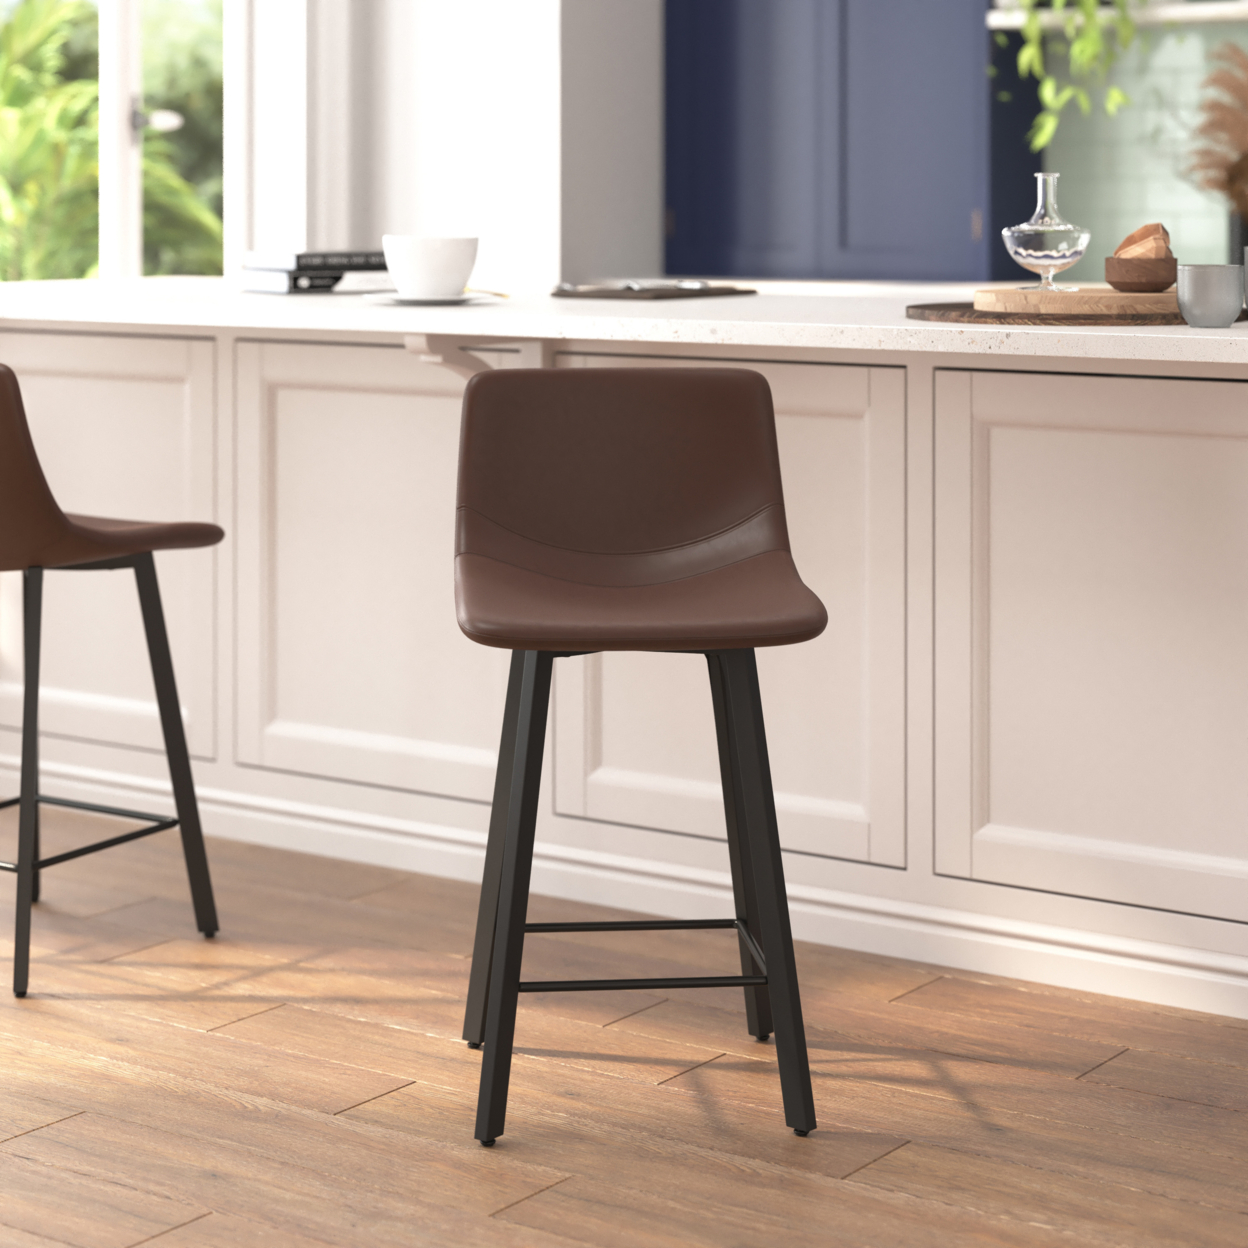 2PK 24 Brown Leather Stools